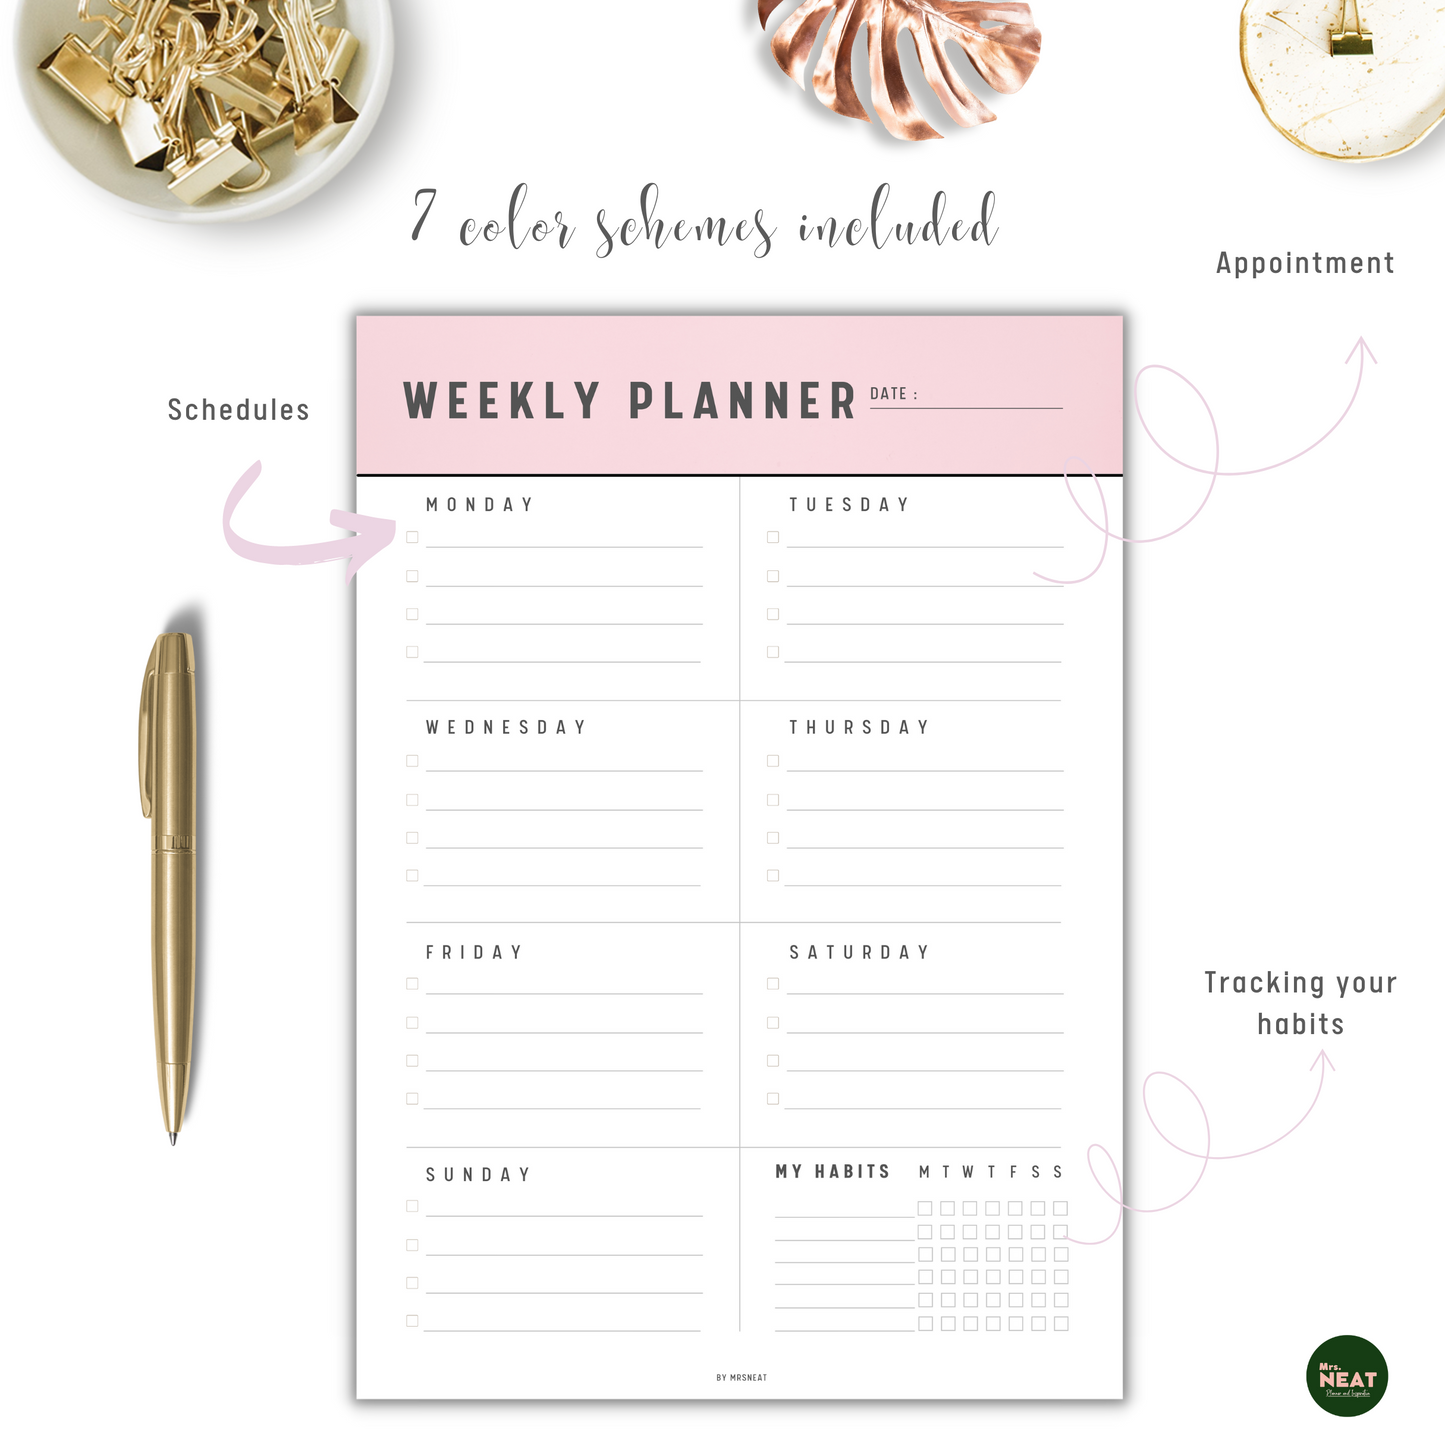 Soft Pink Weekly Planner with room for Appointment, Schedules, and Habit Tracker